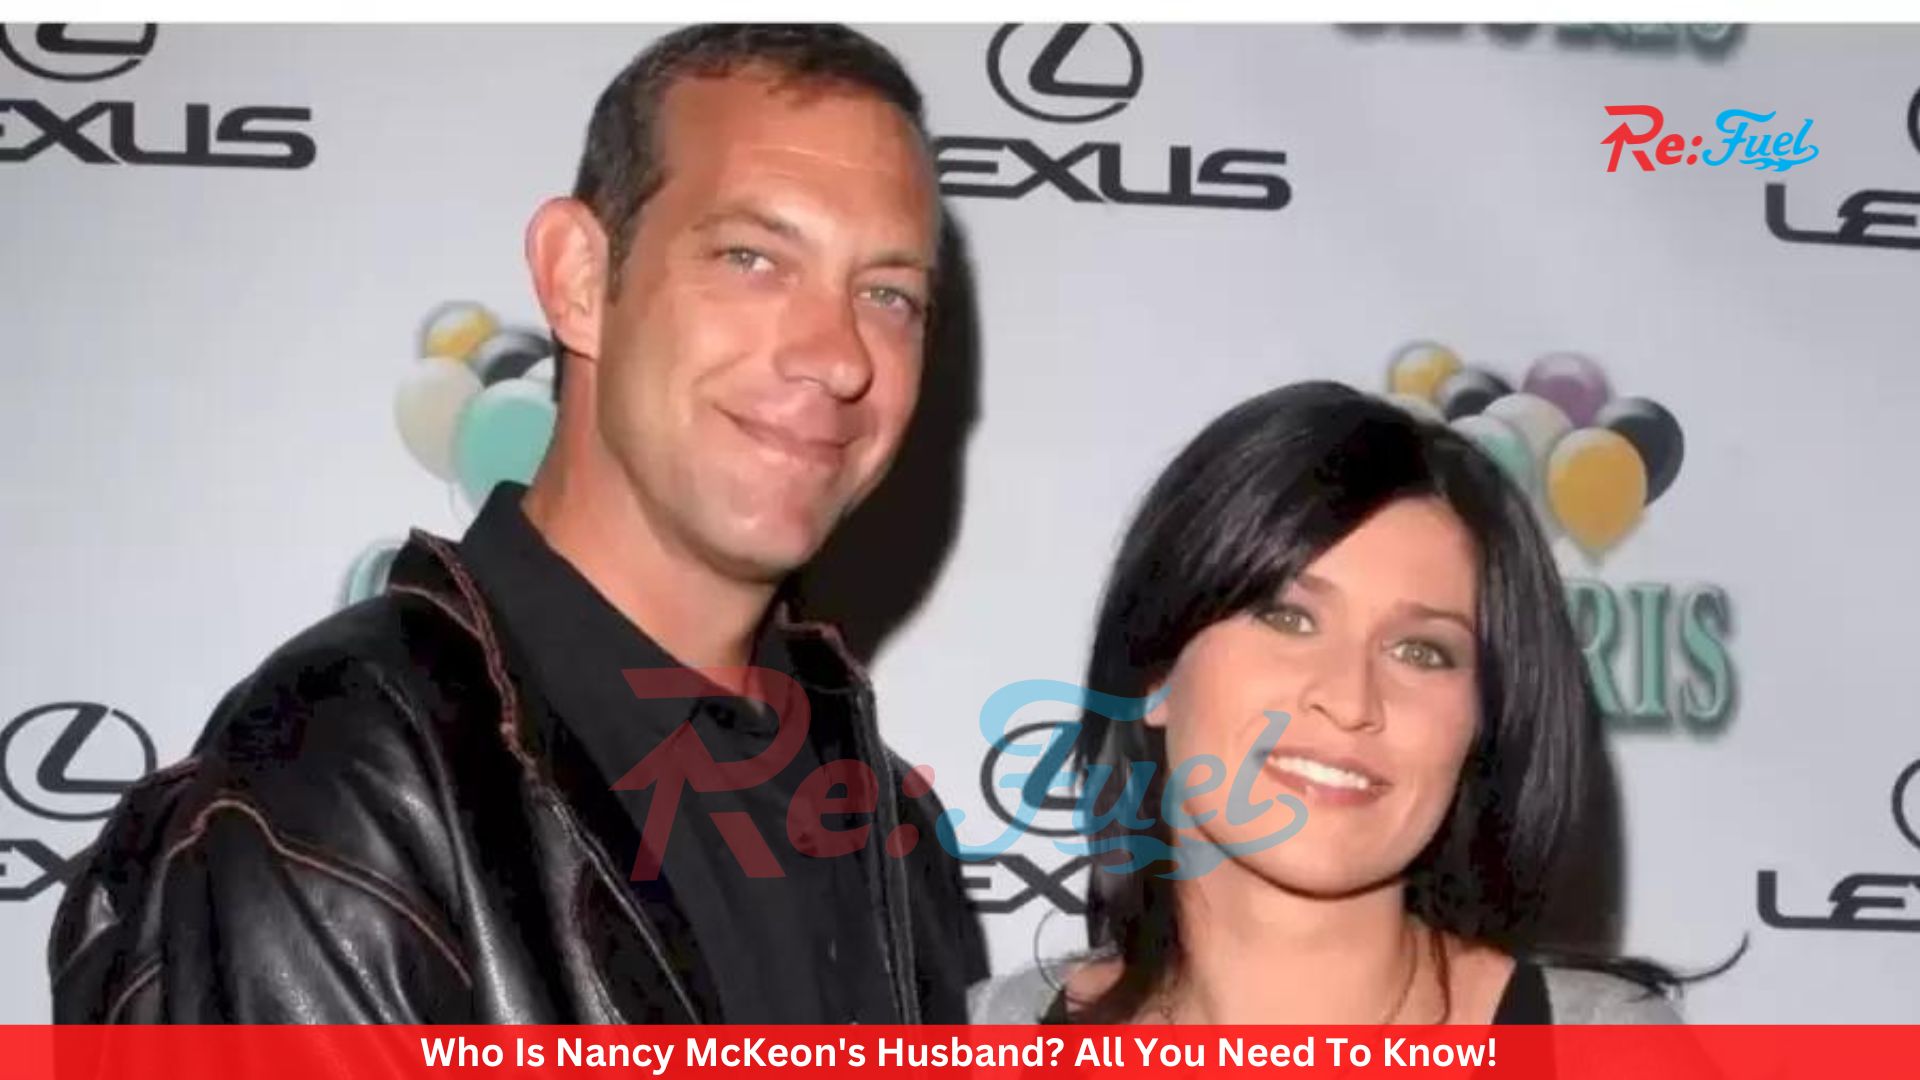 Who Is Nancy McKeon's Husband? All You Need To Know!